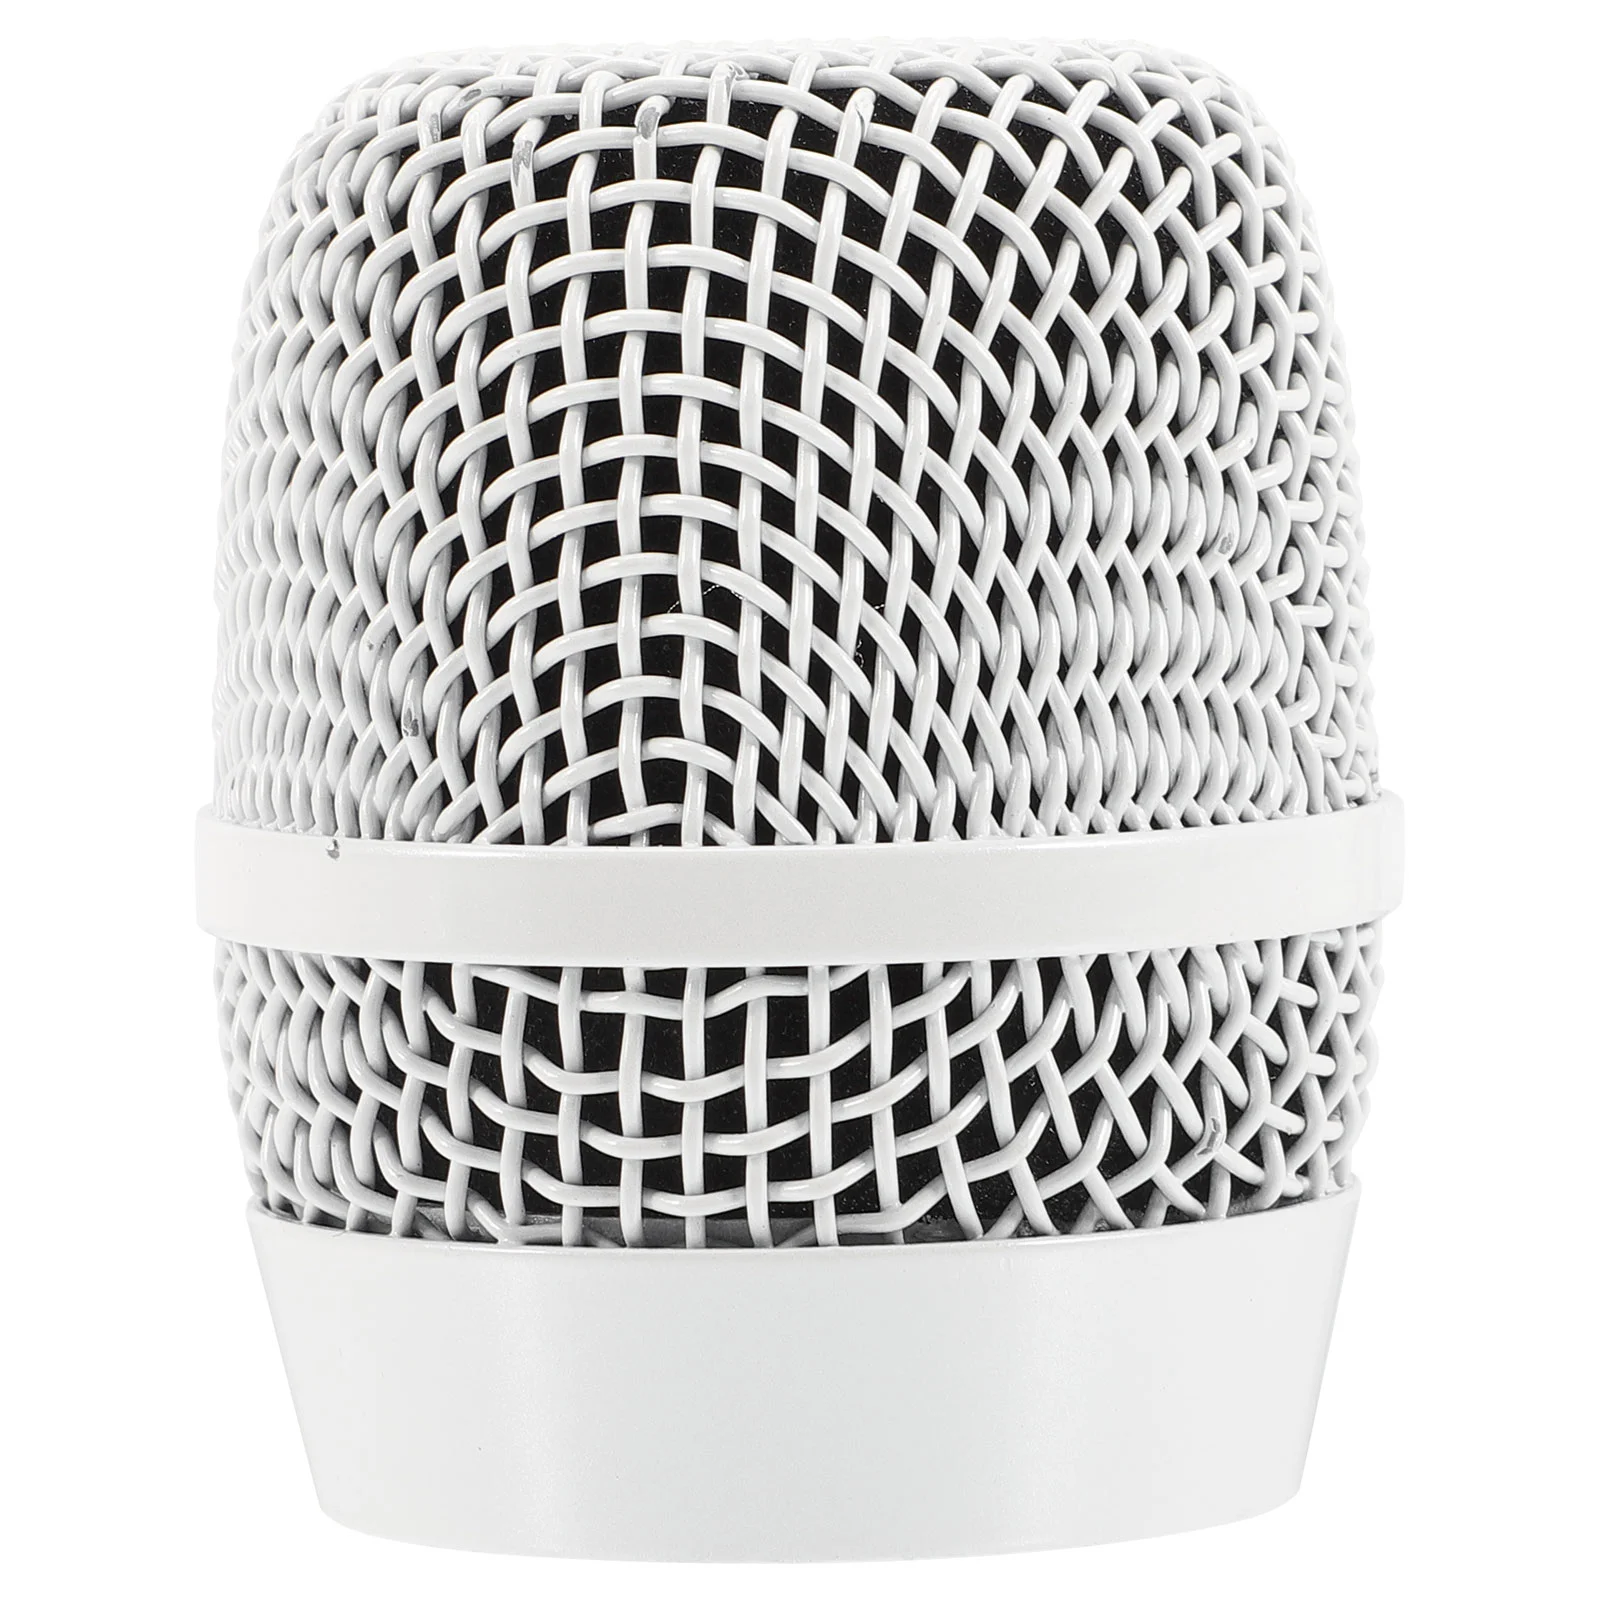 

Mic Metal Grille Microphone Head Parts Supplies Wireless Replacement Cover Foam Replacing Mesh Fittings Accessories Cordless